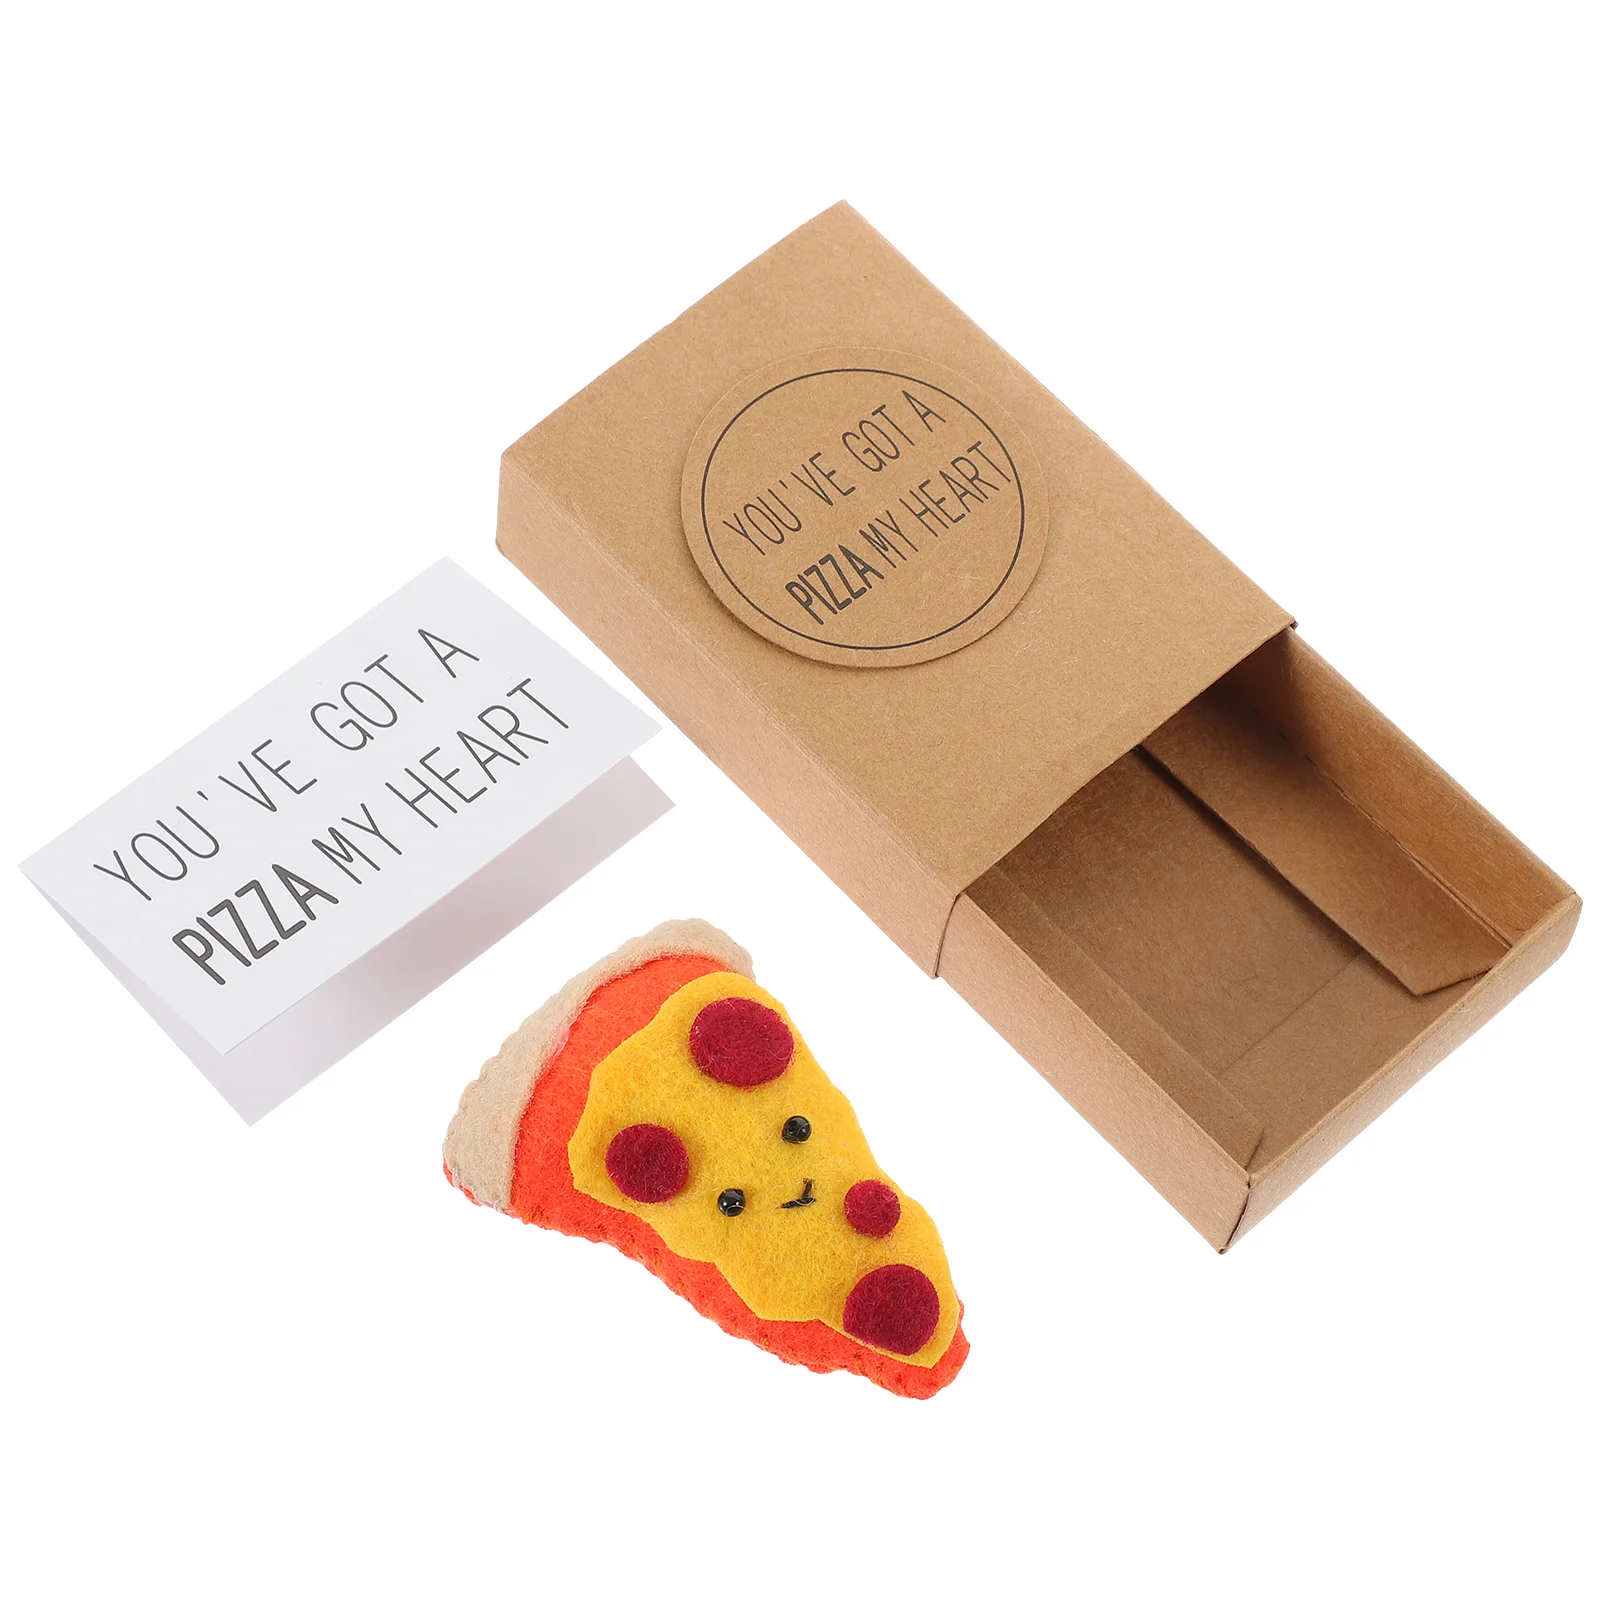 

Adorable Pizza Gift Holiday Gift Box Festival Present Friendship Gift Box for Friends